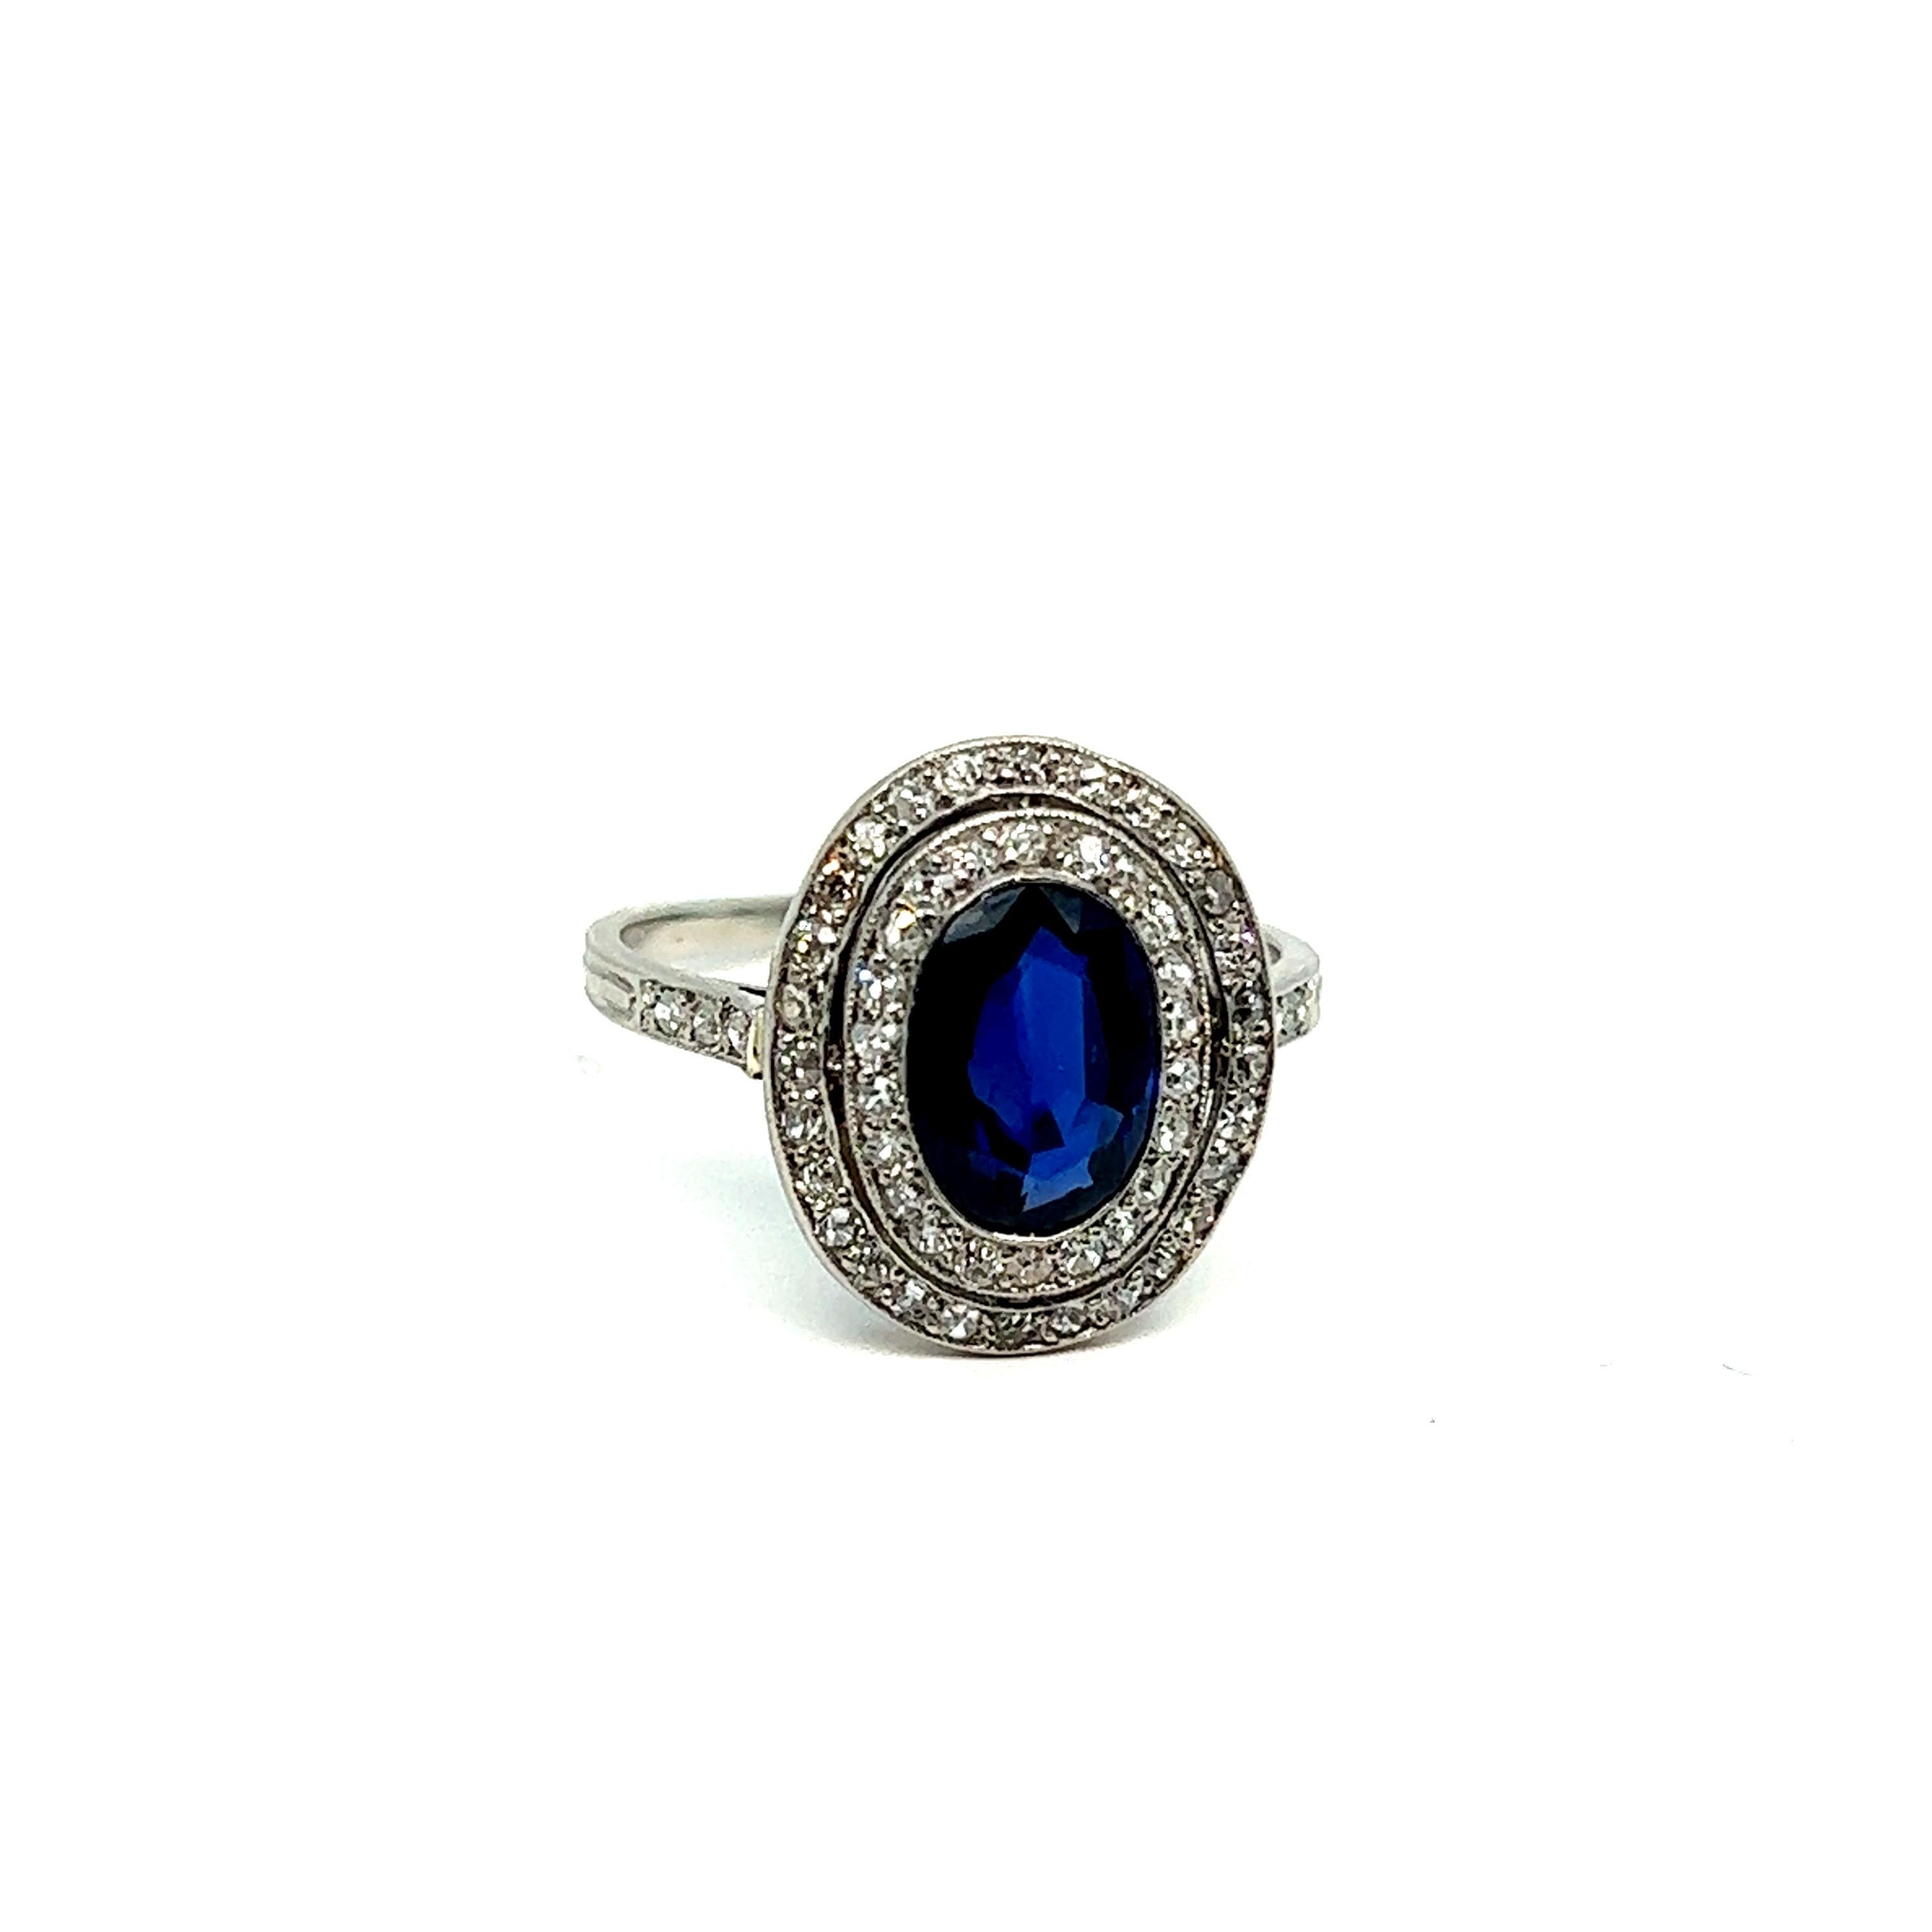 Old European Cut Vintage French Engagement Oval Cluster Ring Blue Sapphire 2.5C Platinum Diamonds